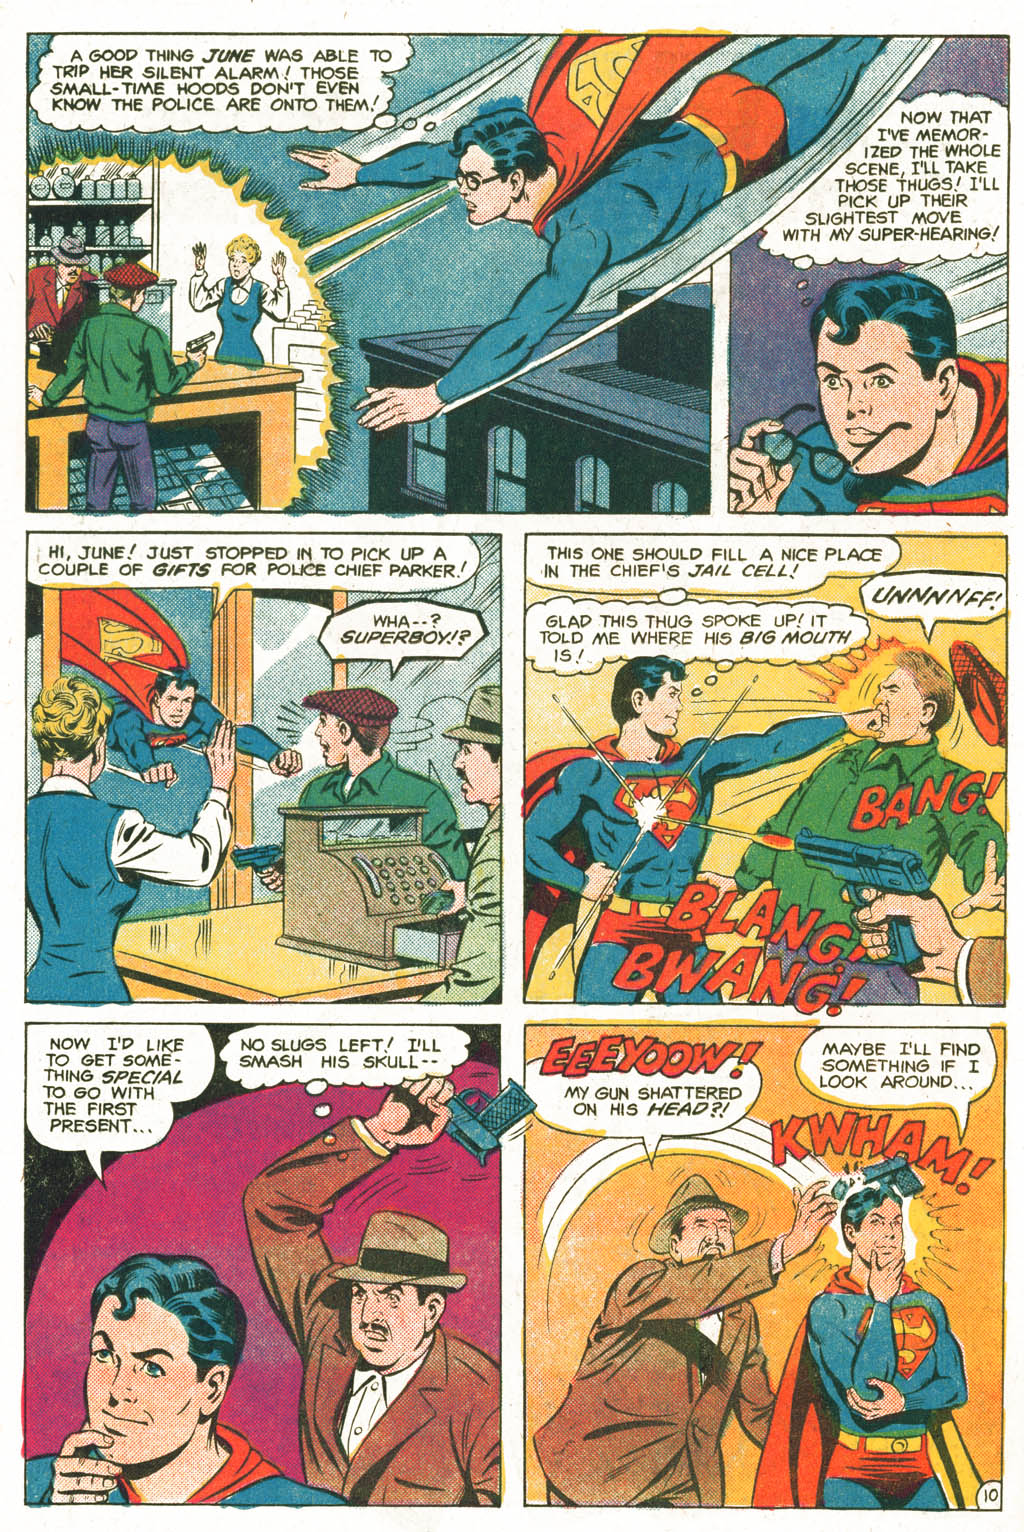 The New Adventures of Superboy 24 Page 10